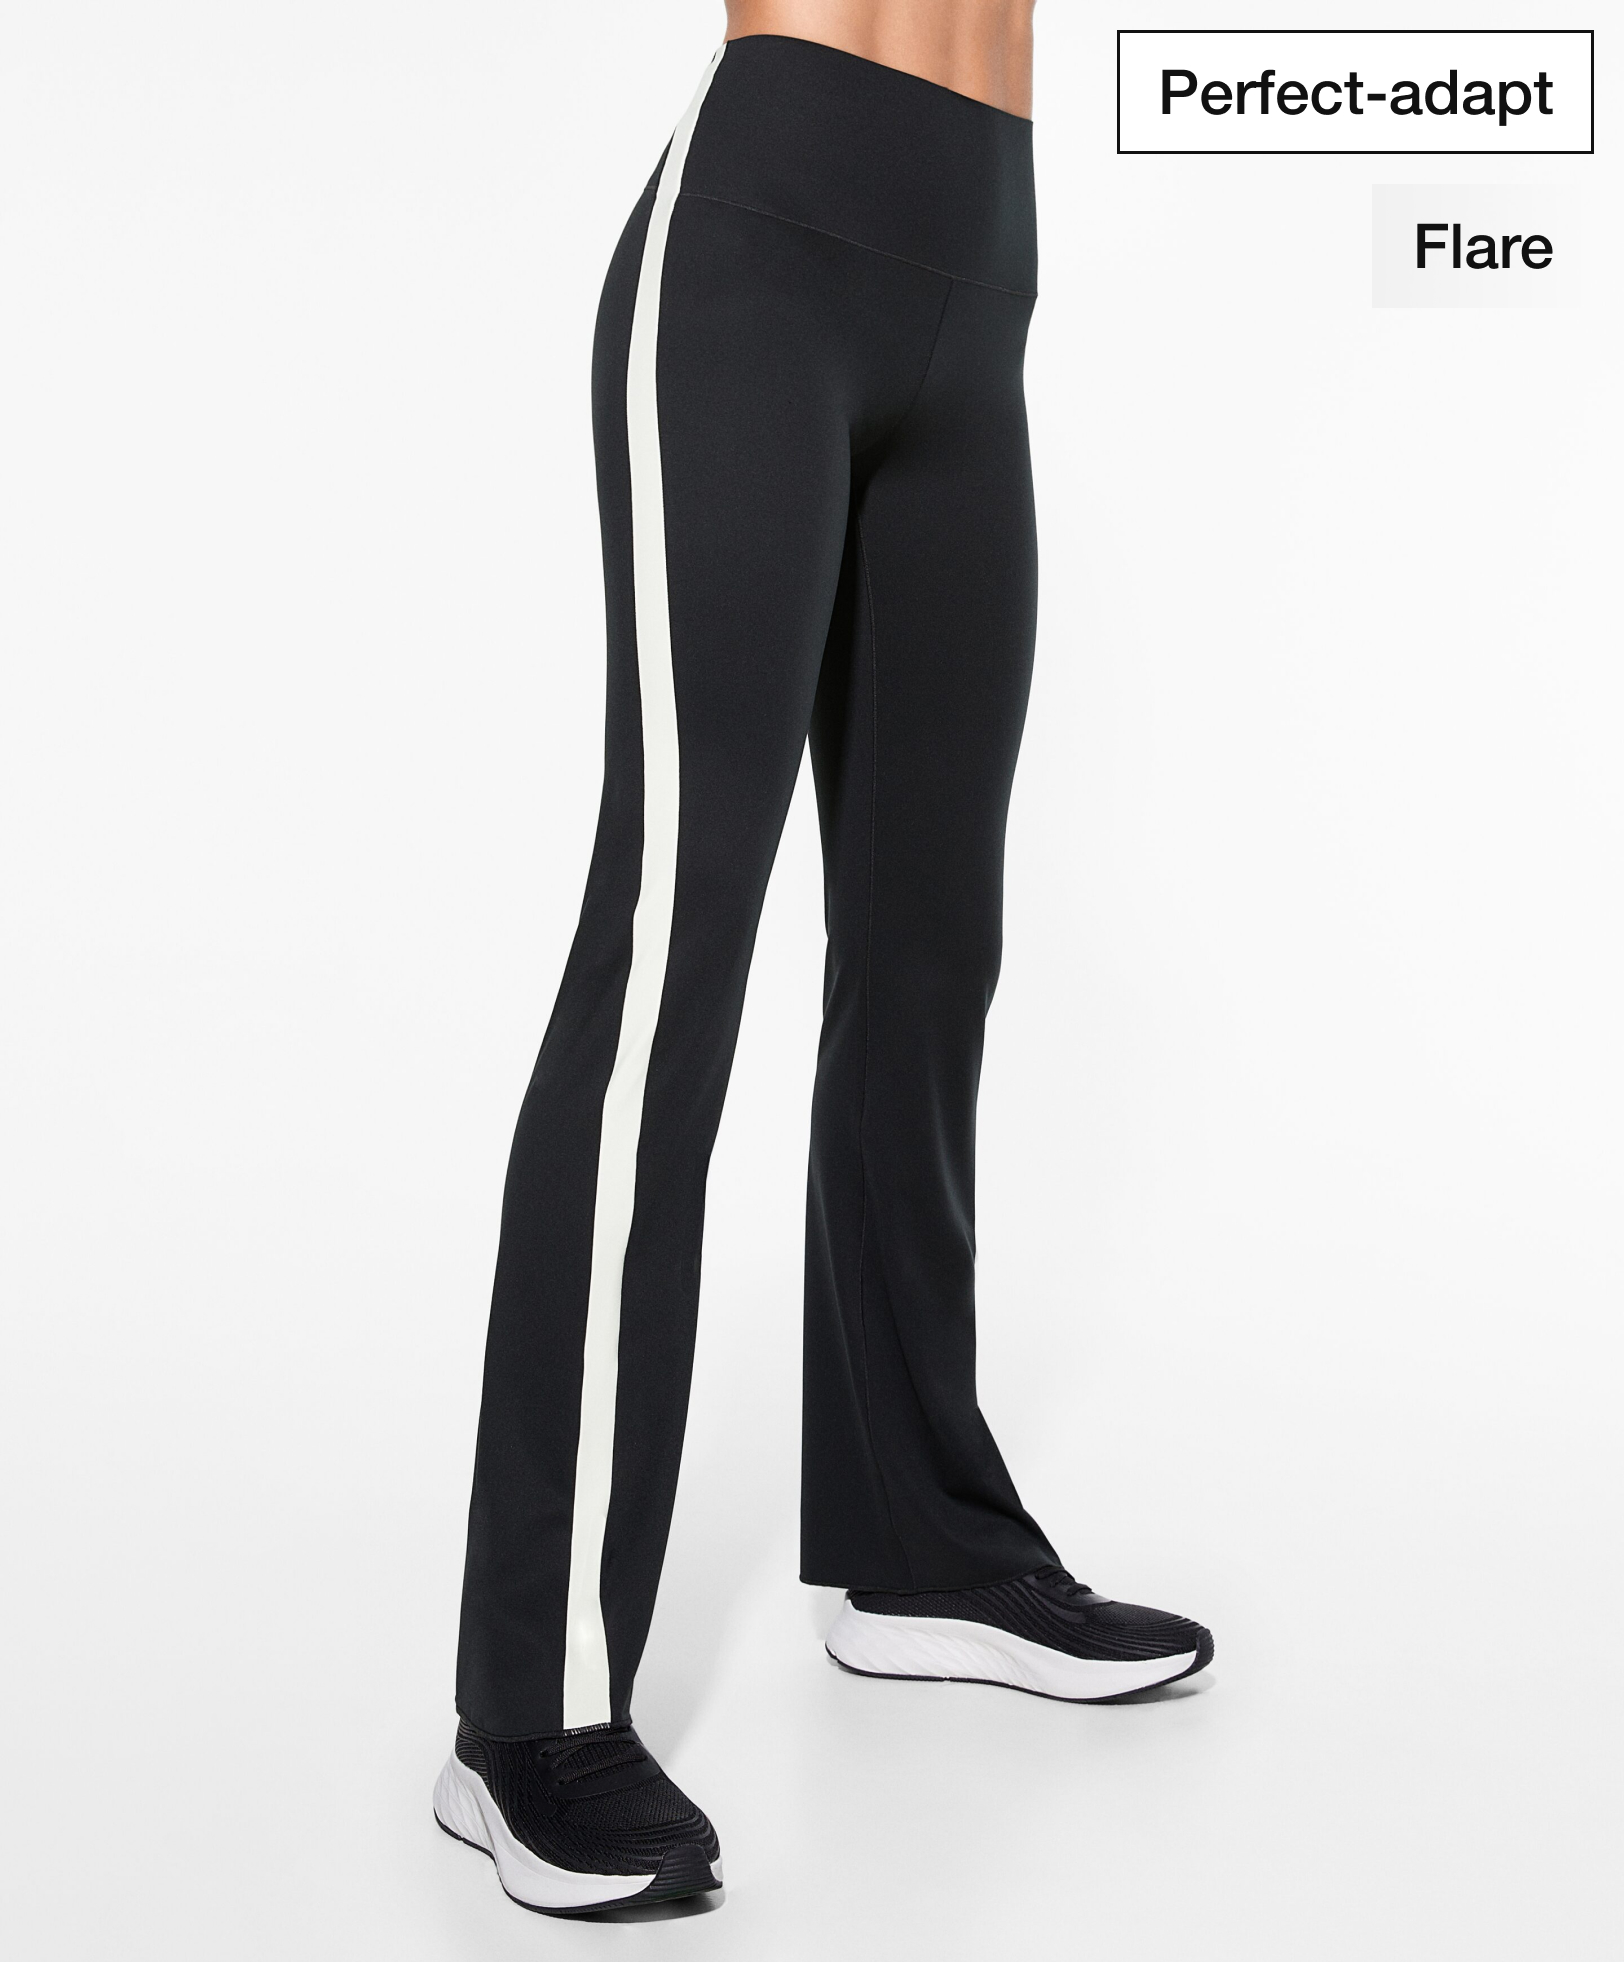 Perfect-adapt 80cm flare trousers